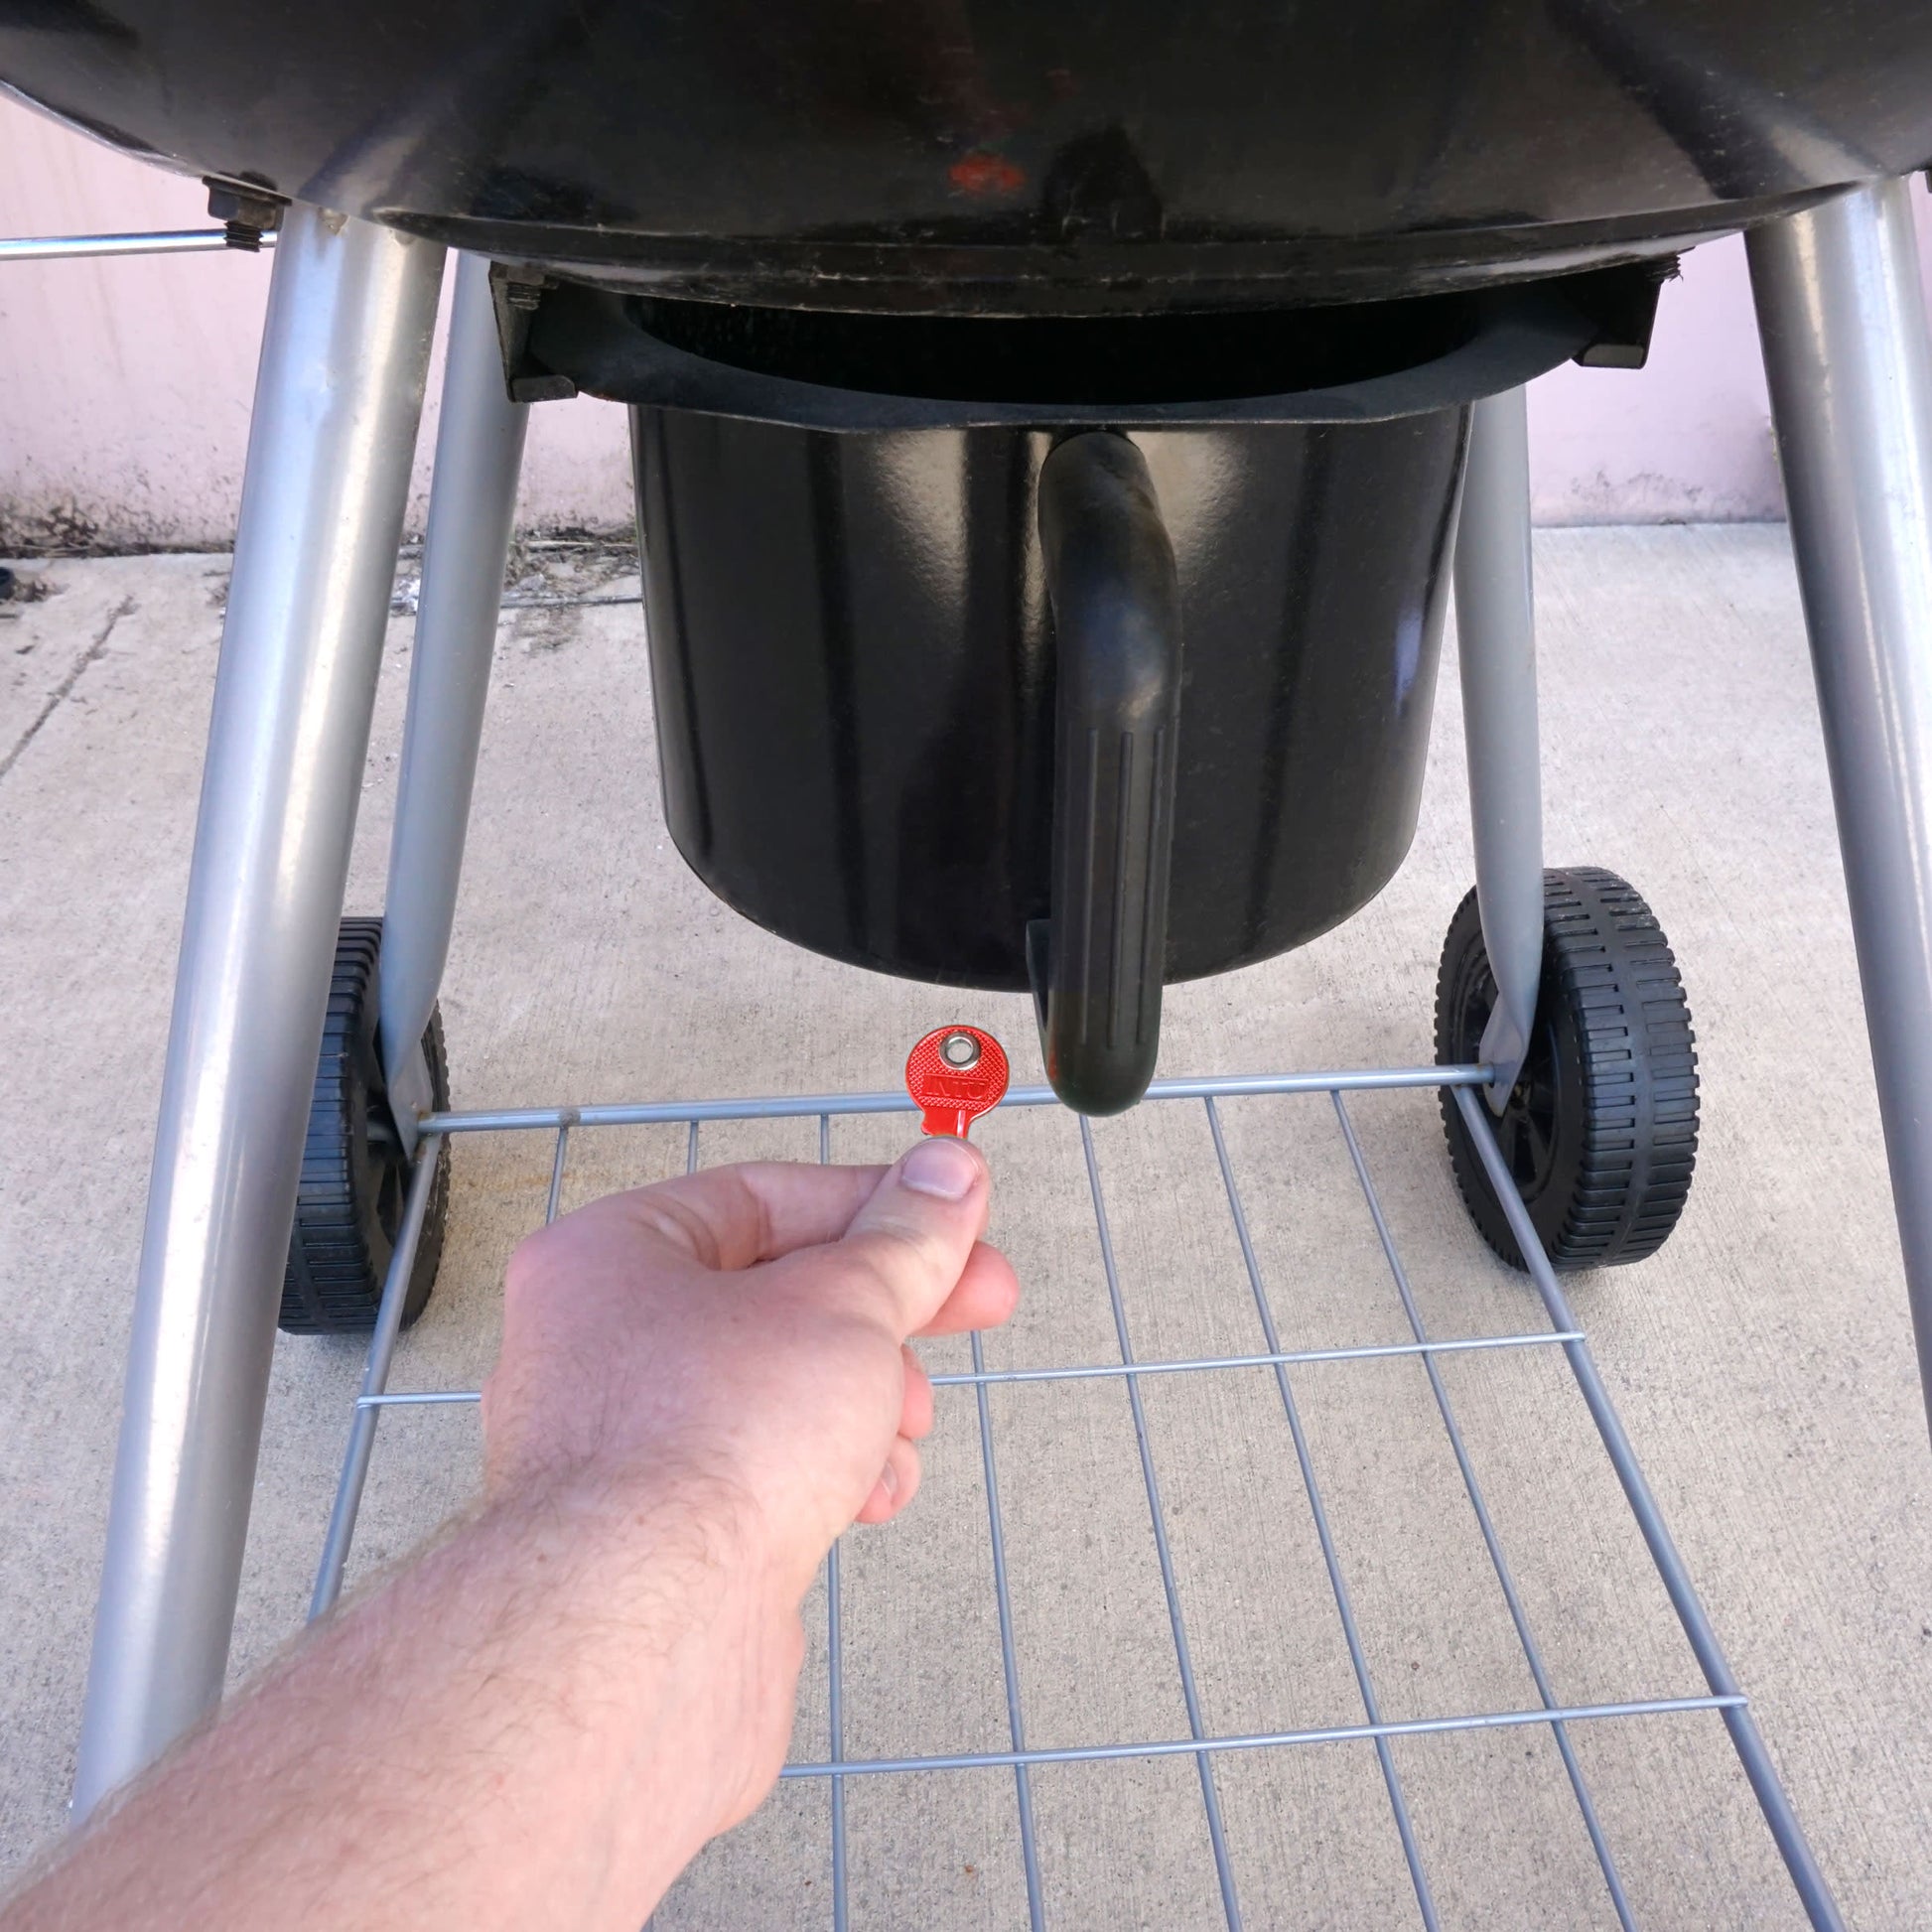 Load image into Gallery viewer, 50692 Magnetic Key, M1-69 Red - Hand Holding Red Magnetic Key Beneath a Barbeque Grill